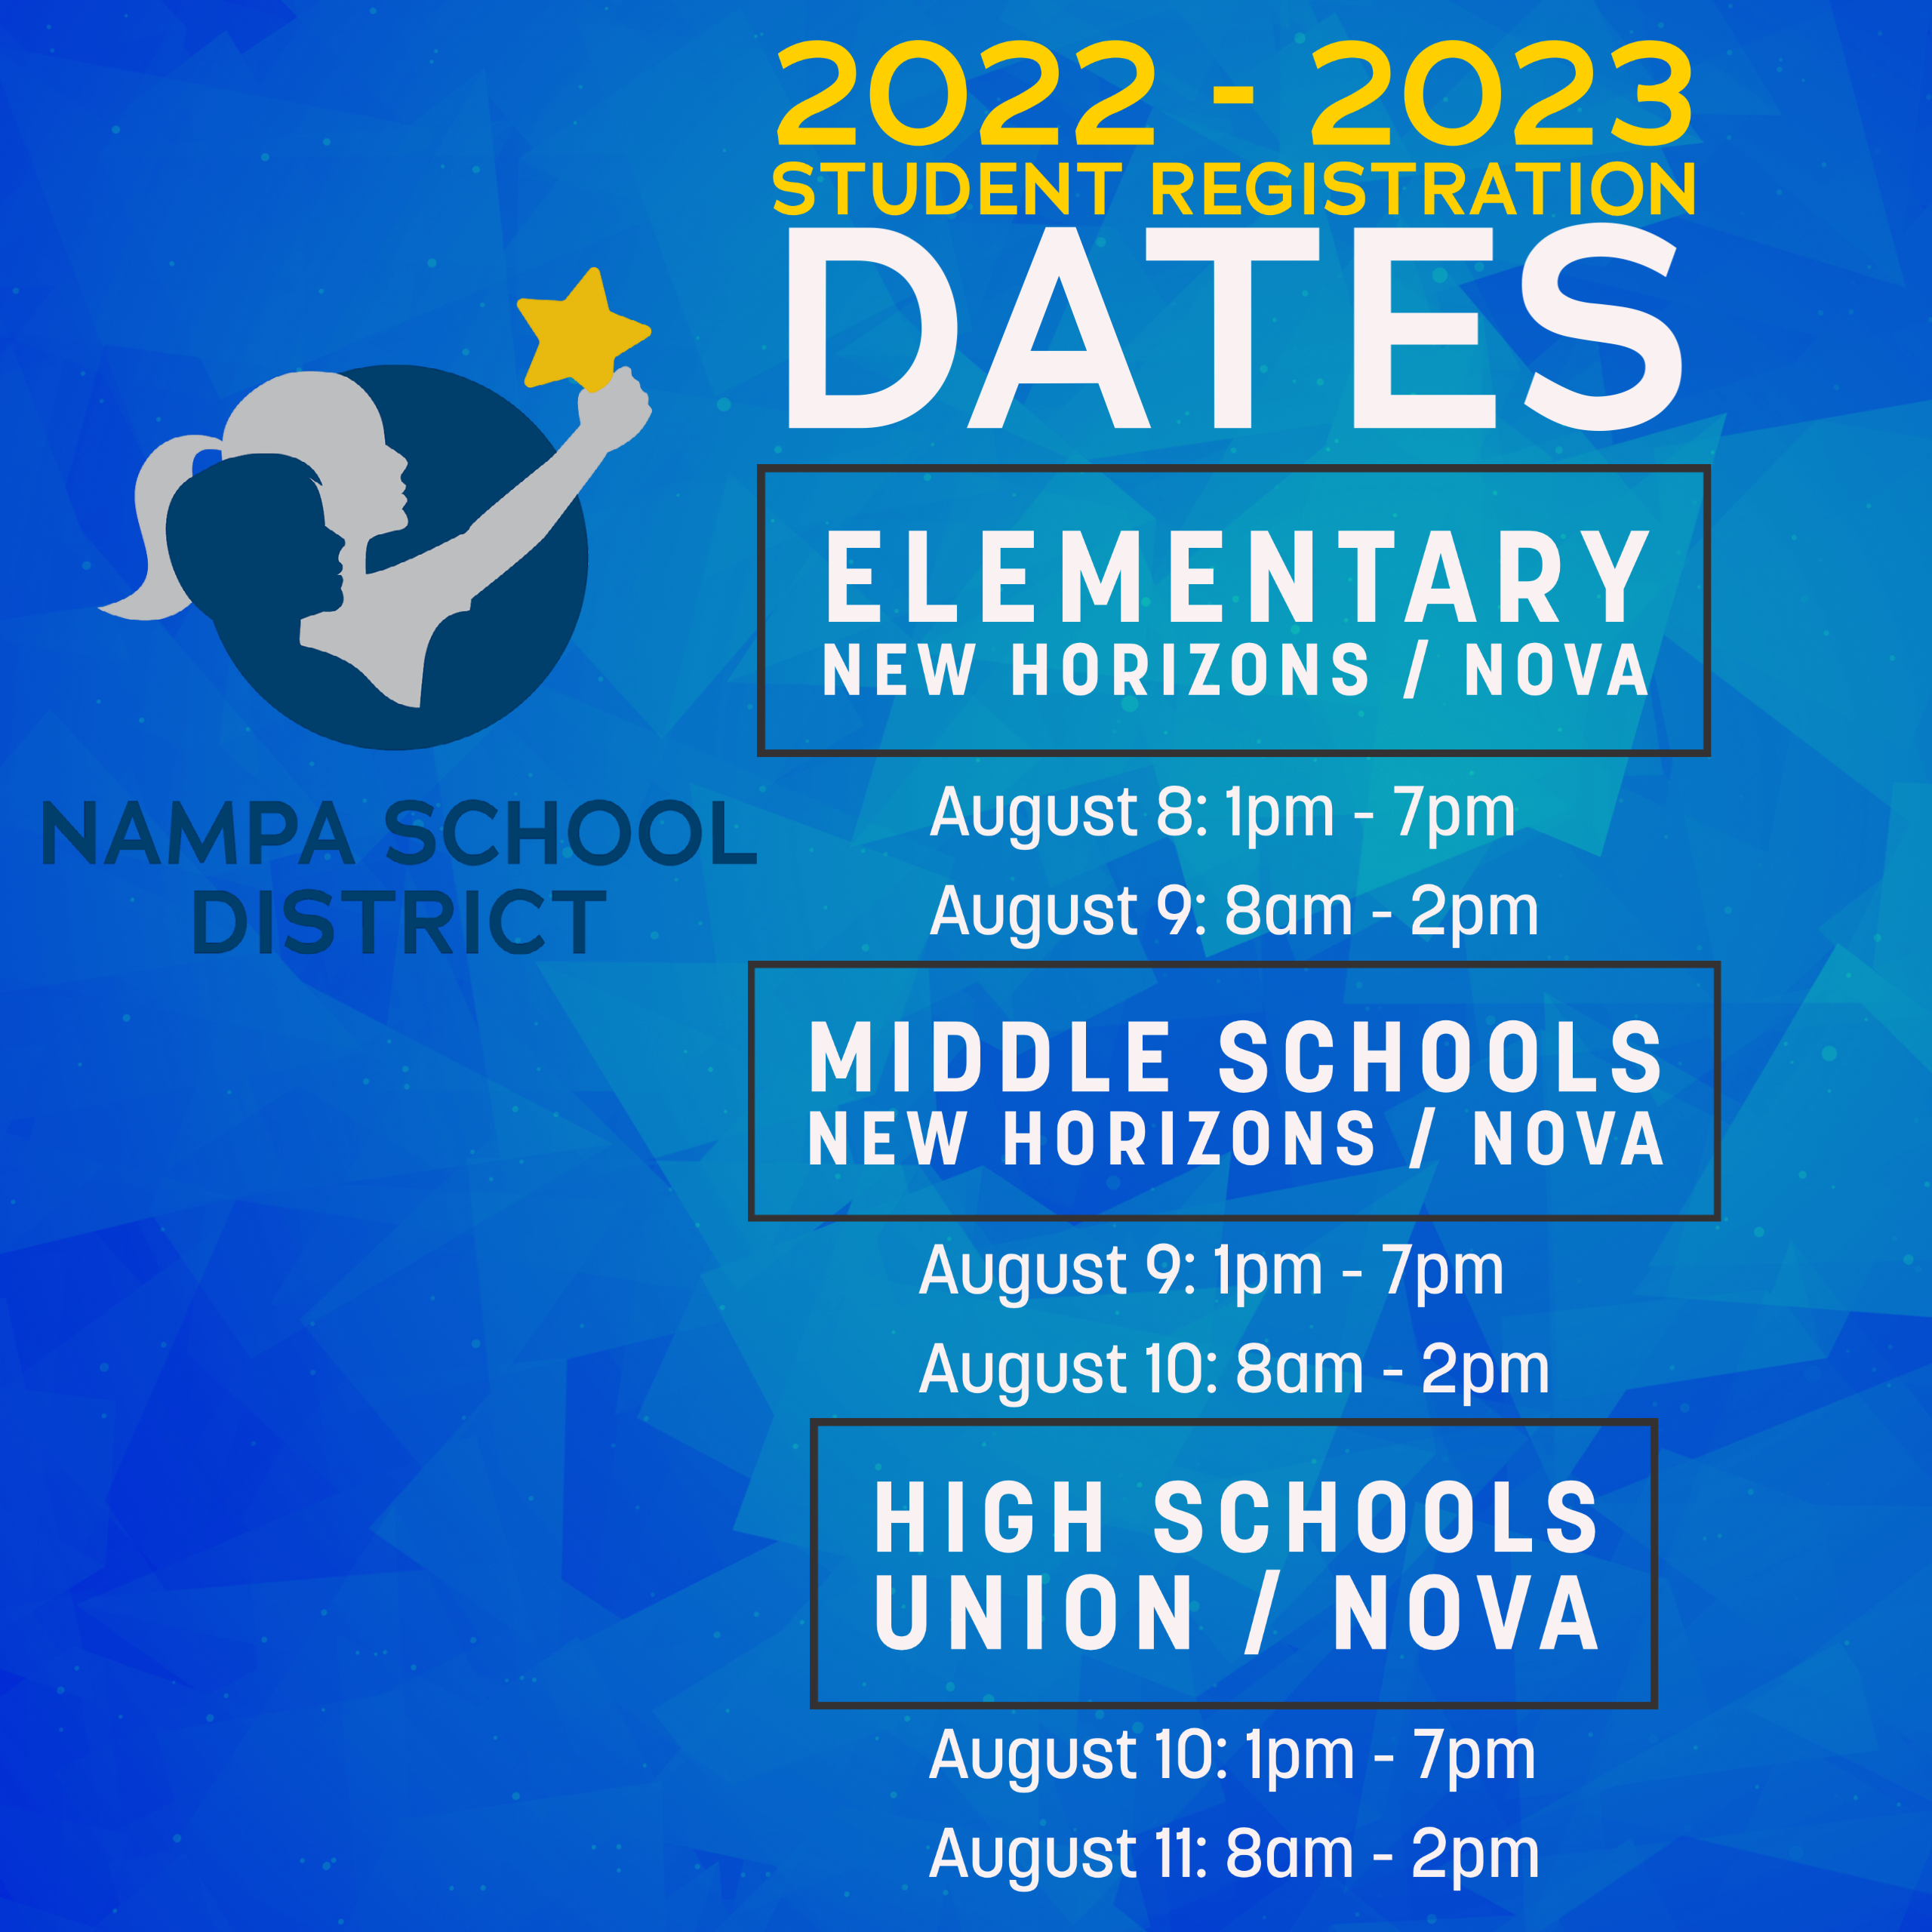 List of registration dates and times on a blue background with district logo on the left.